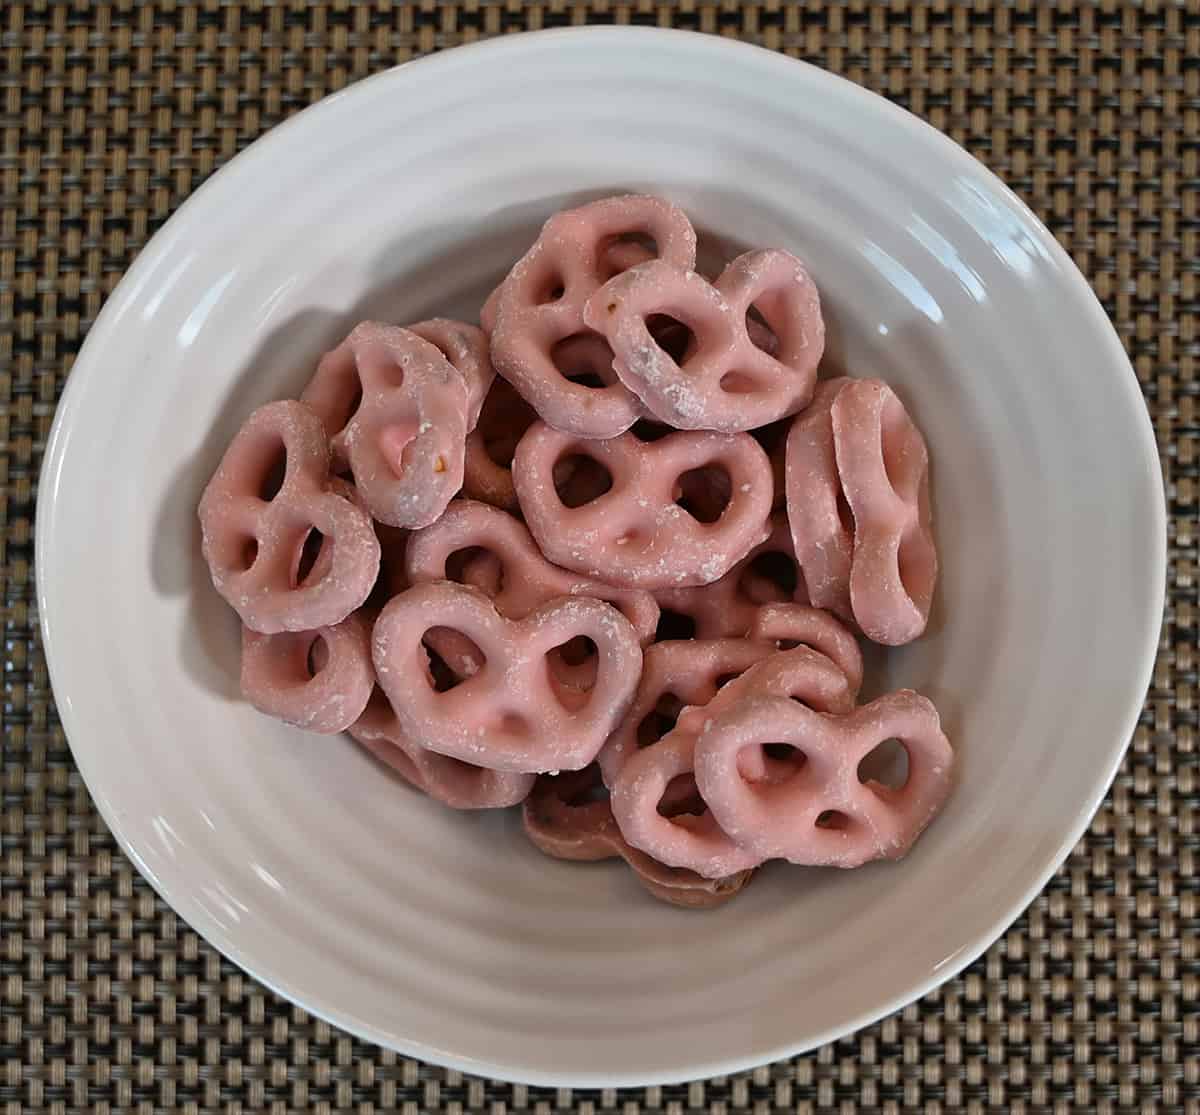 Top down image of a bowl of strawberry covered pretzels sitting on a placemat.